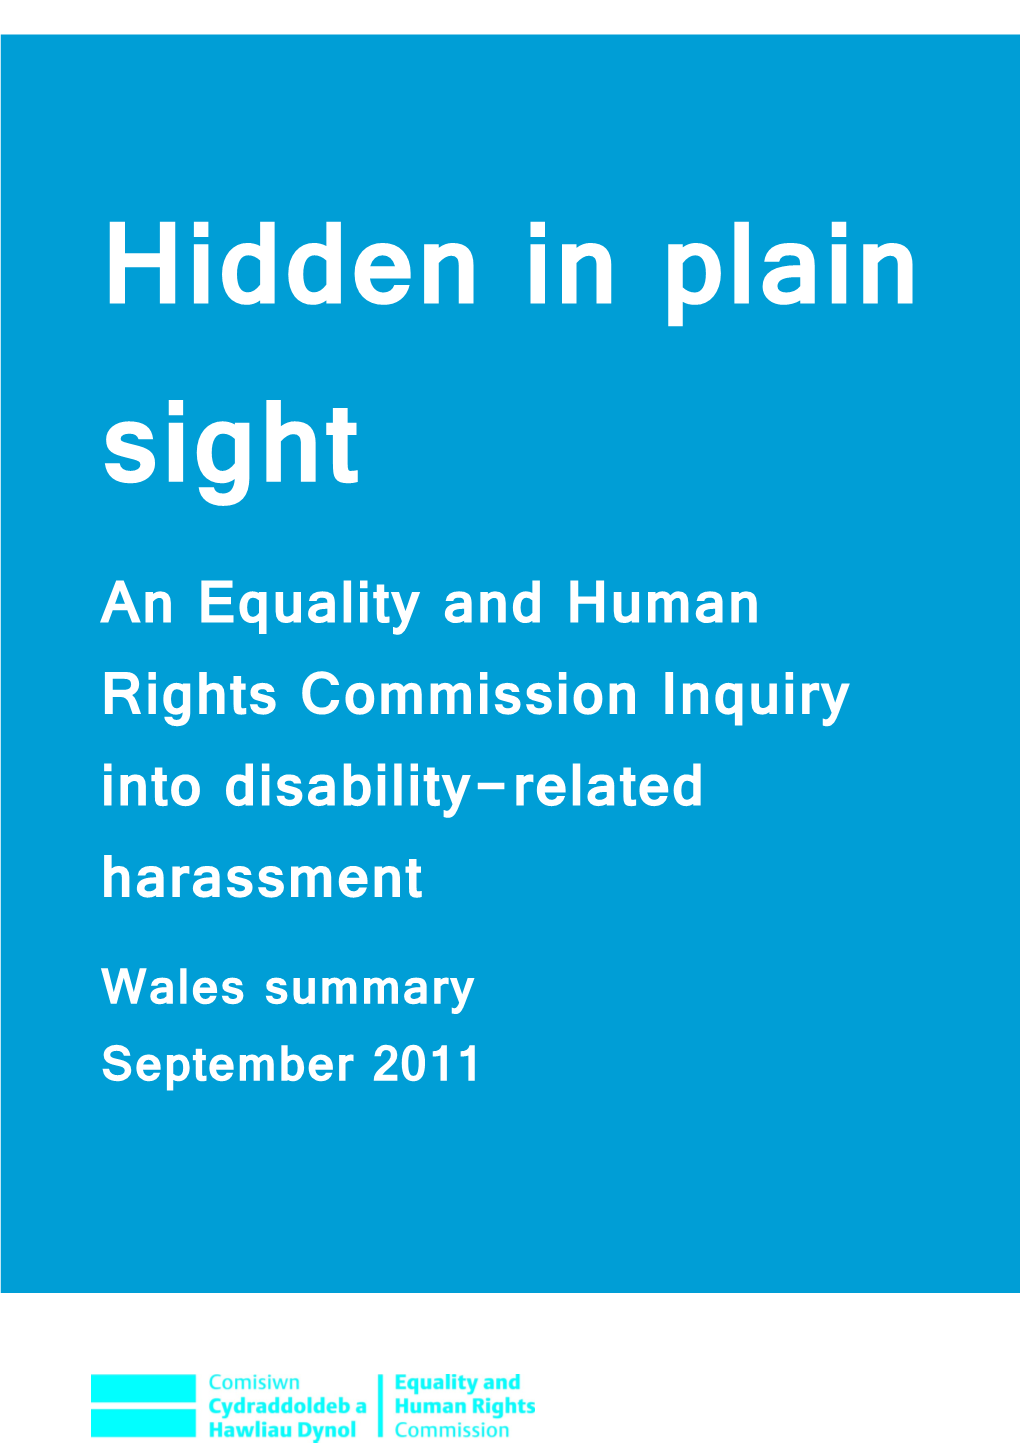 An Equality and Human Rights Commission Inquiry Into Disability-Related Harassment